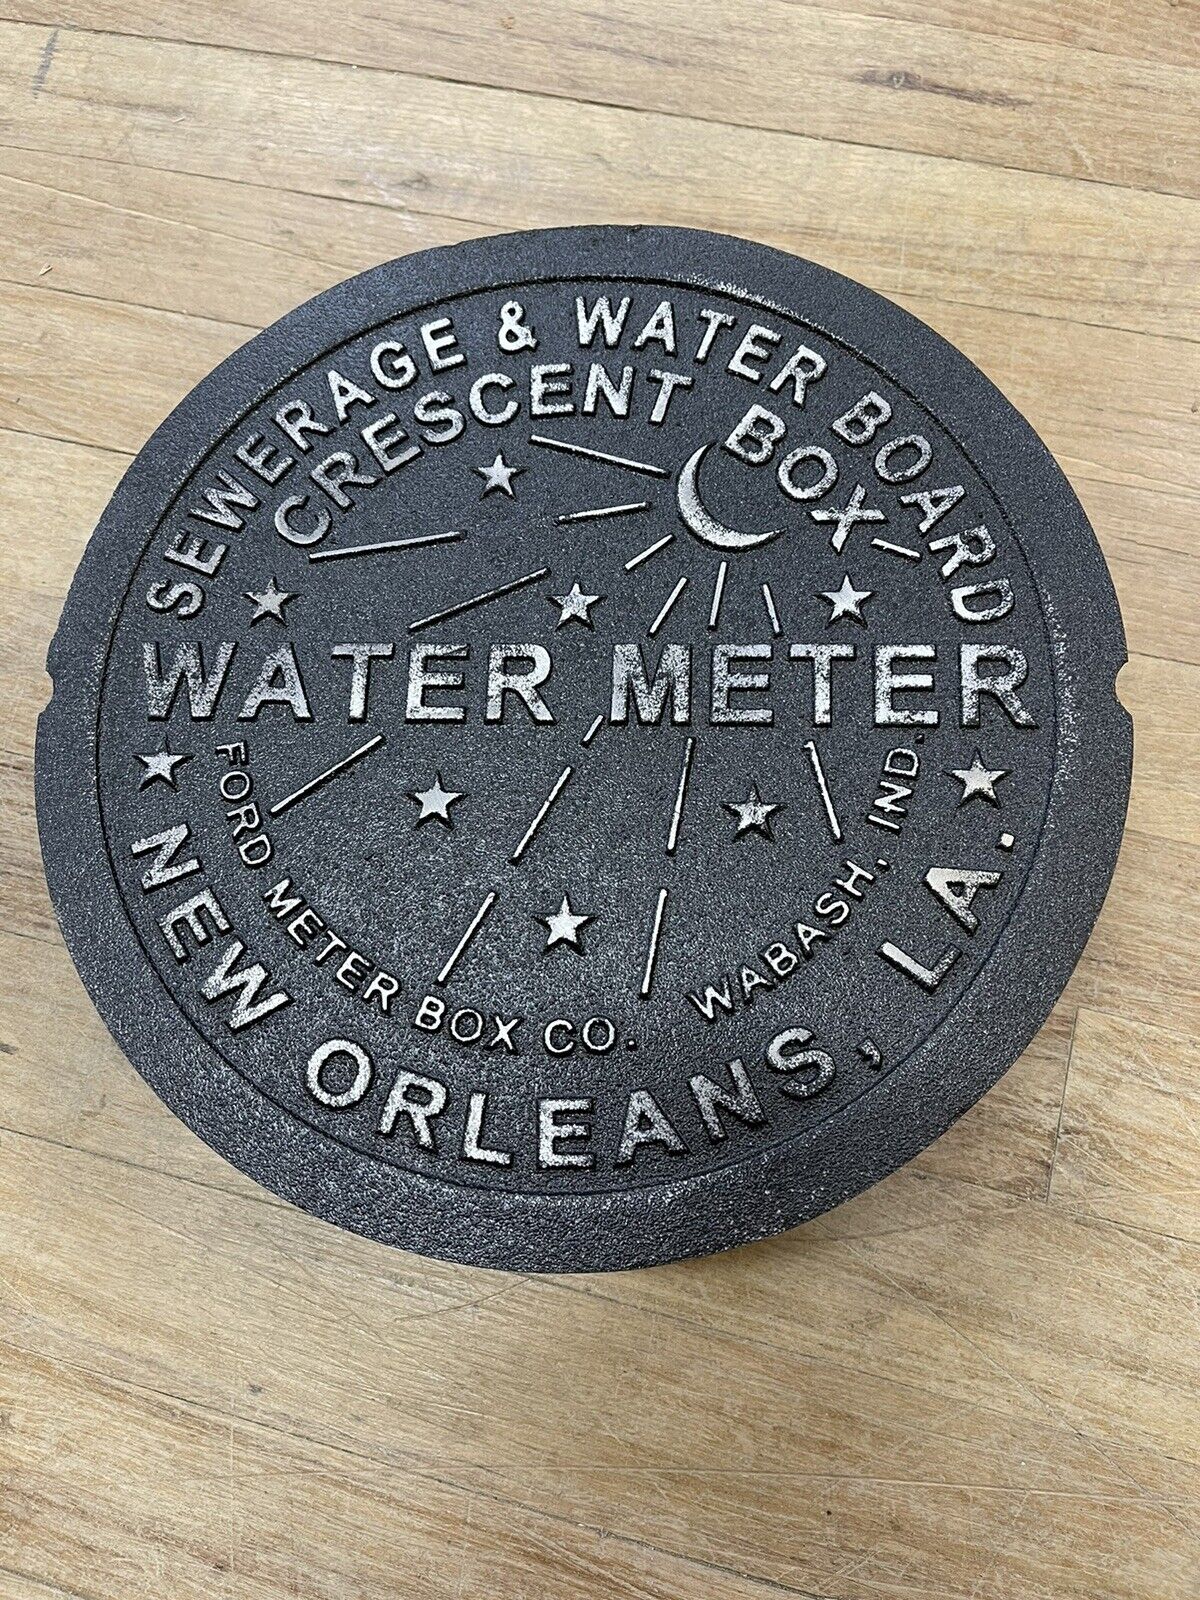 NEW ORLEANS WATER METER BOX COVER ORIGINAL GENUINE CAST IRON MADE IN USA 